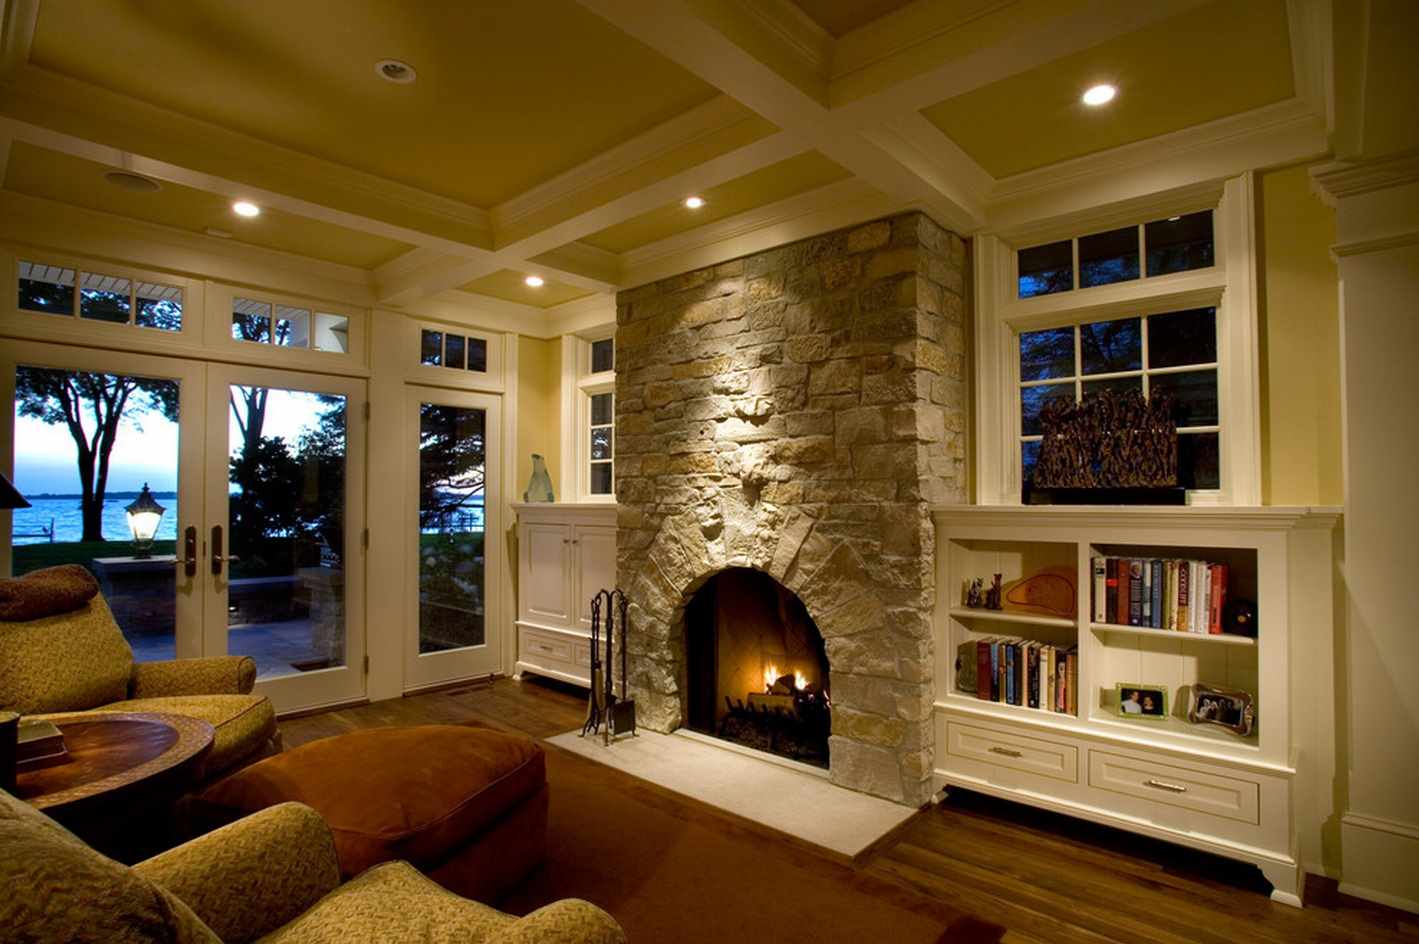 the idea of ​​using a beautiful living room interior with fireplace